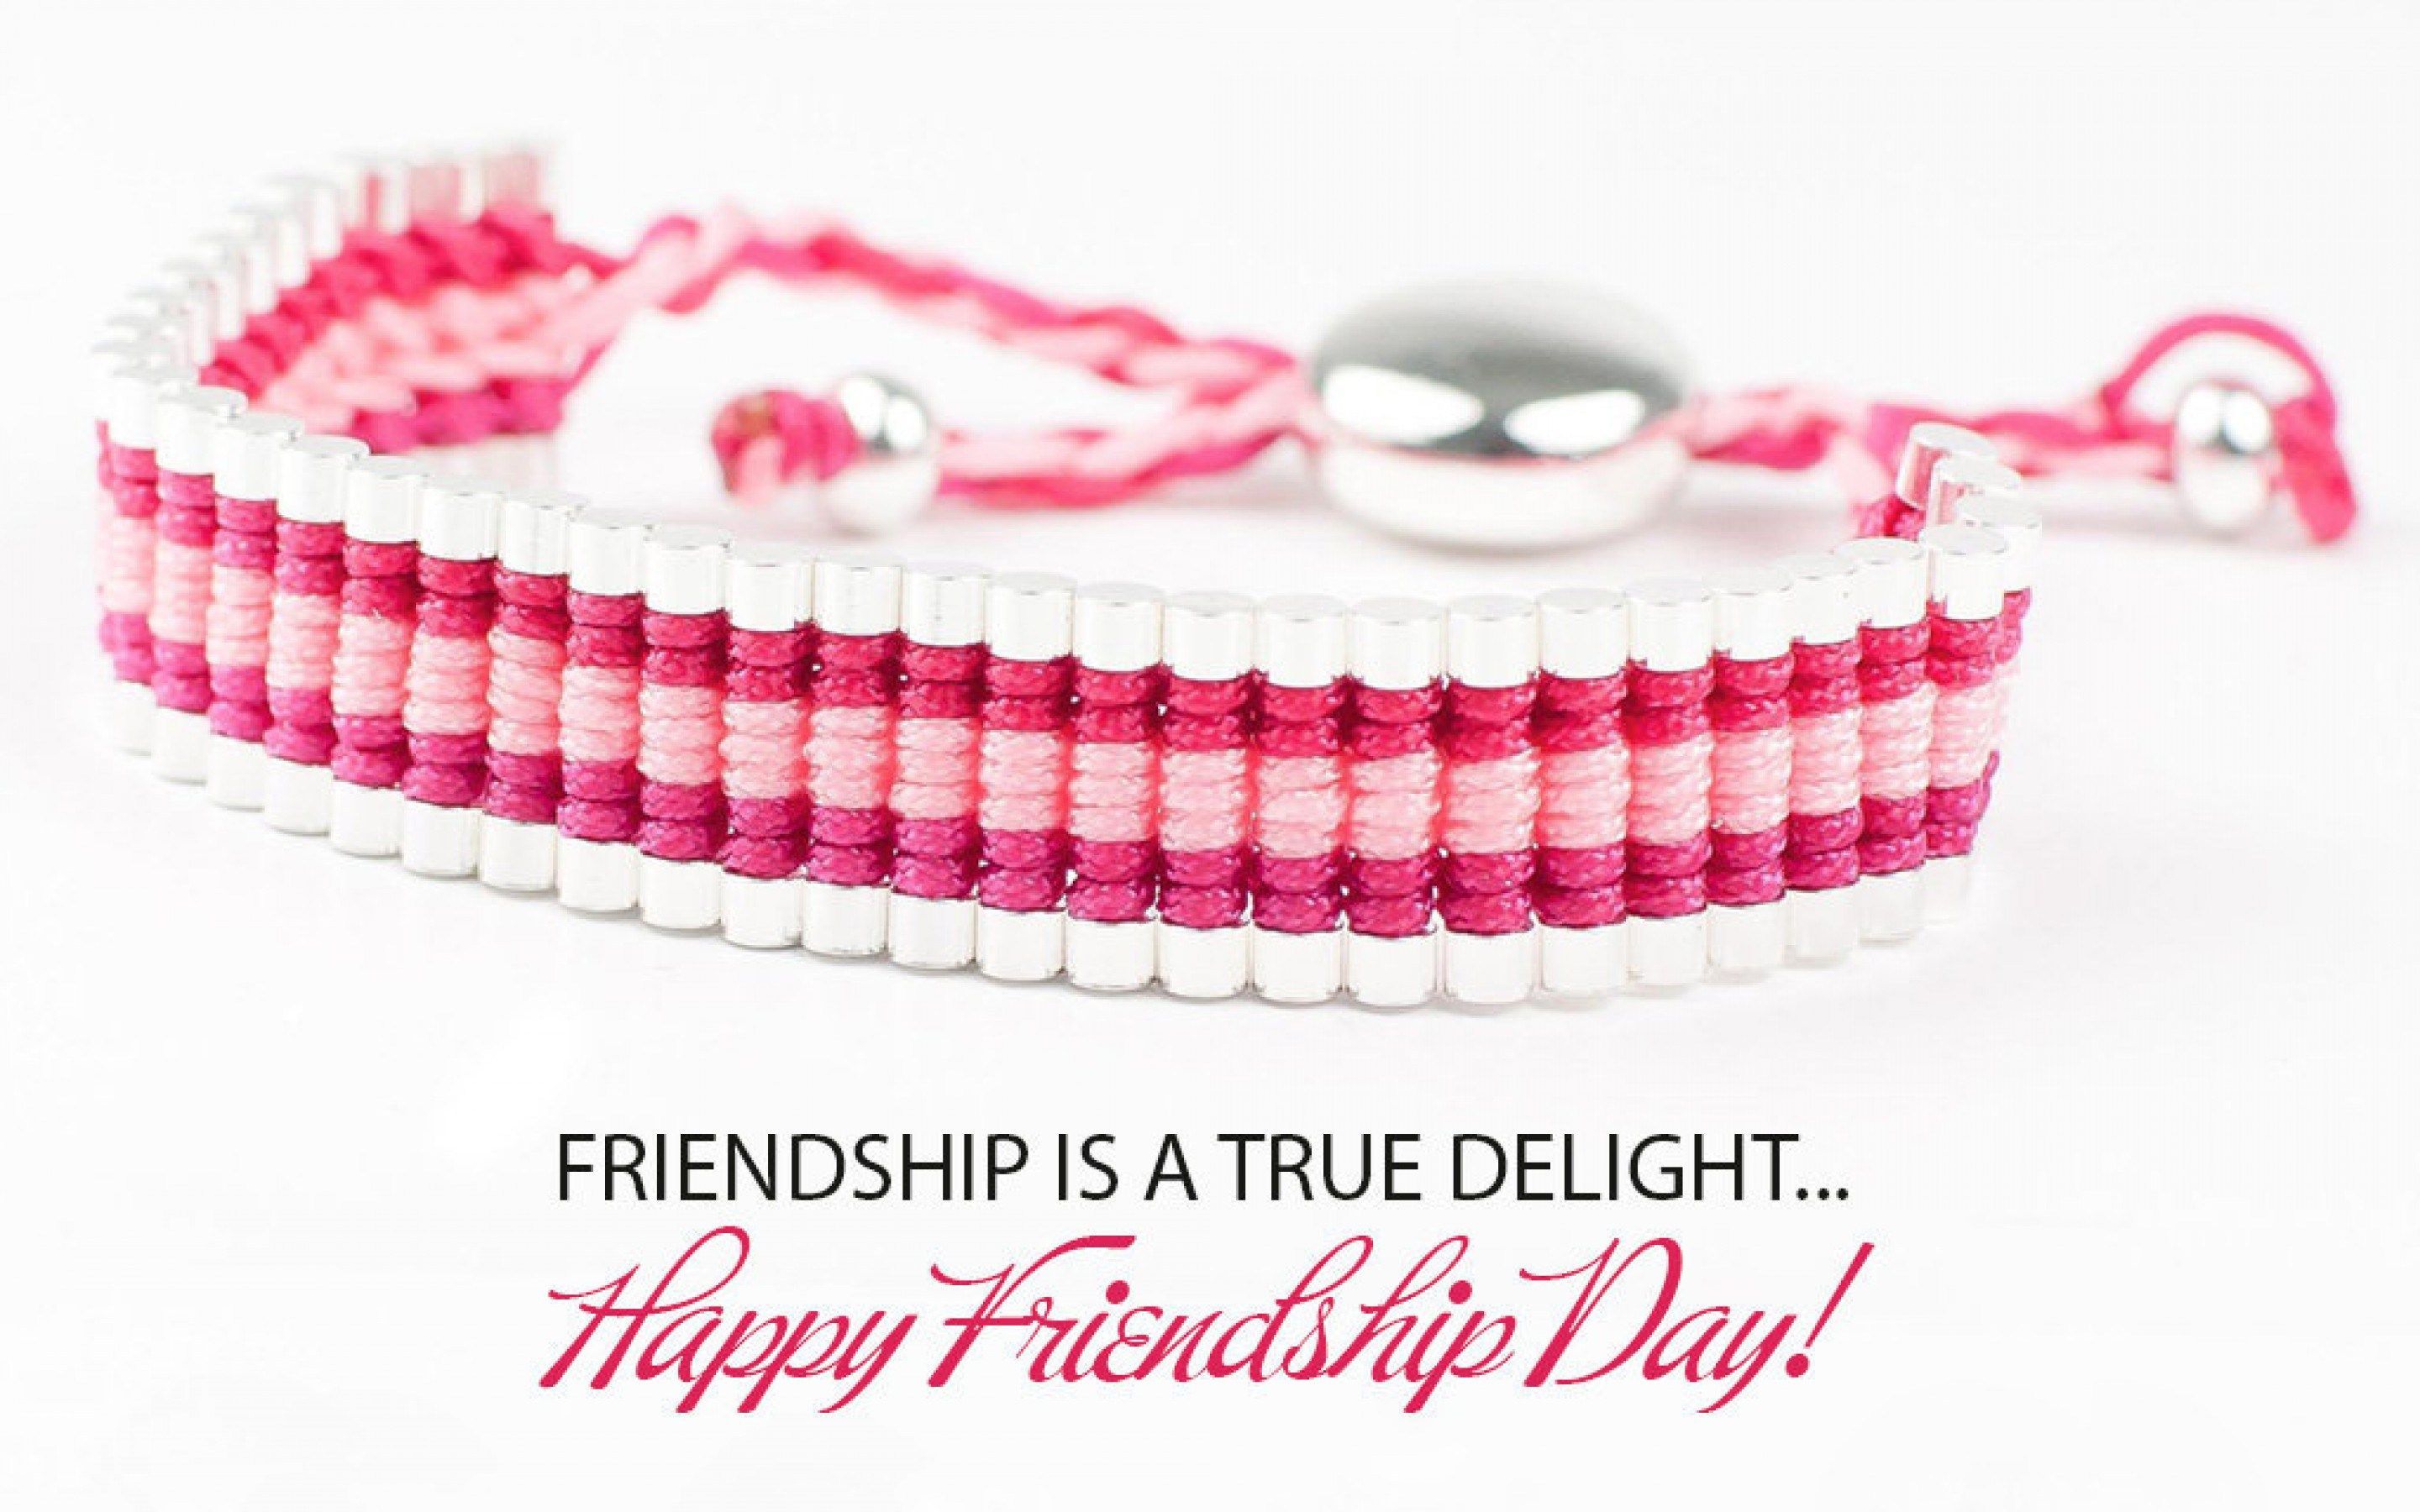 Happy Friendship Day Image, Picture, wallpaper, photo. Happy friendship day, Friendship day wishes, Friendship day greetings